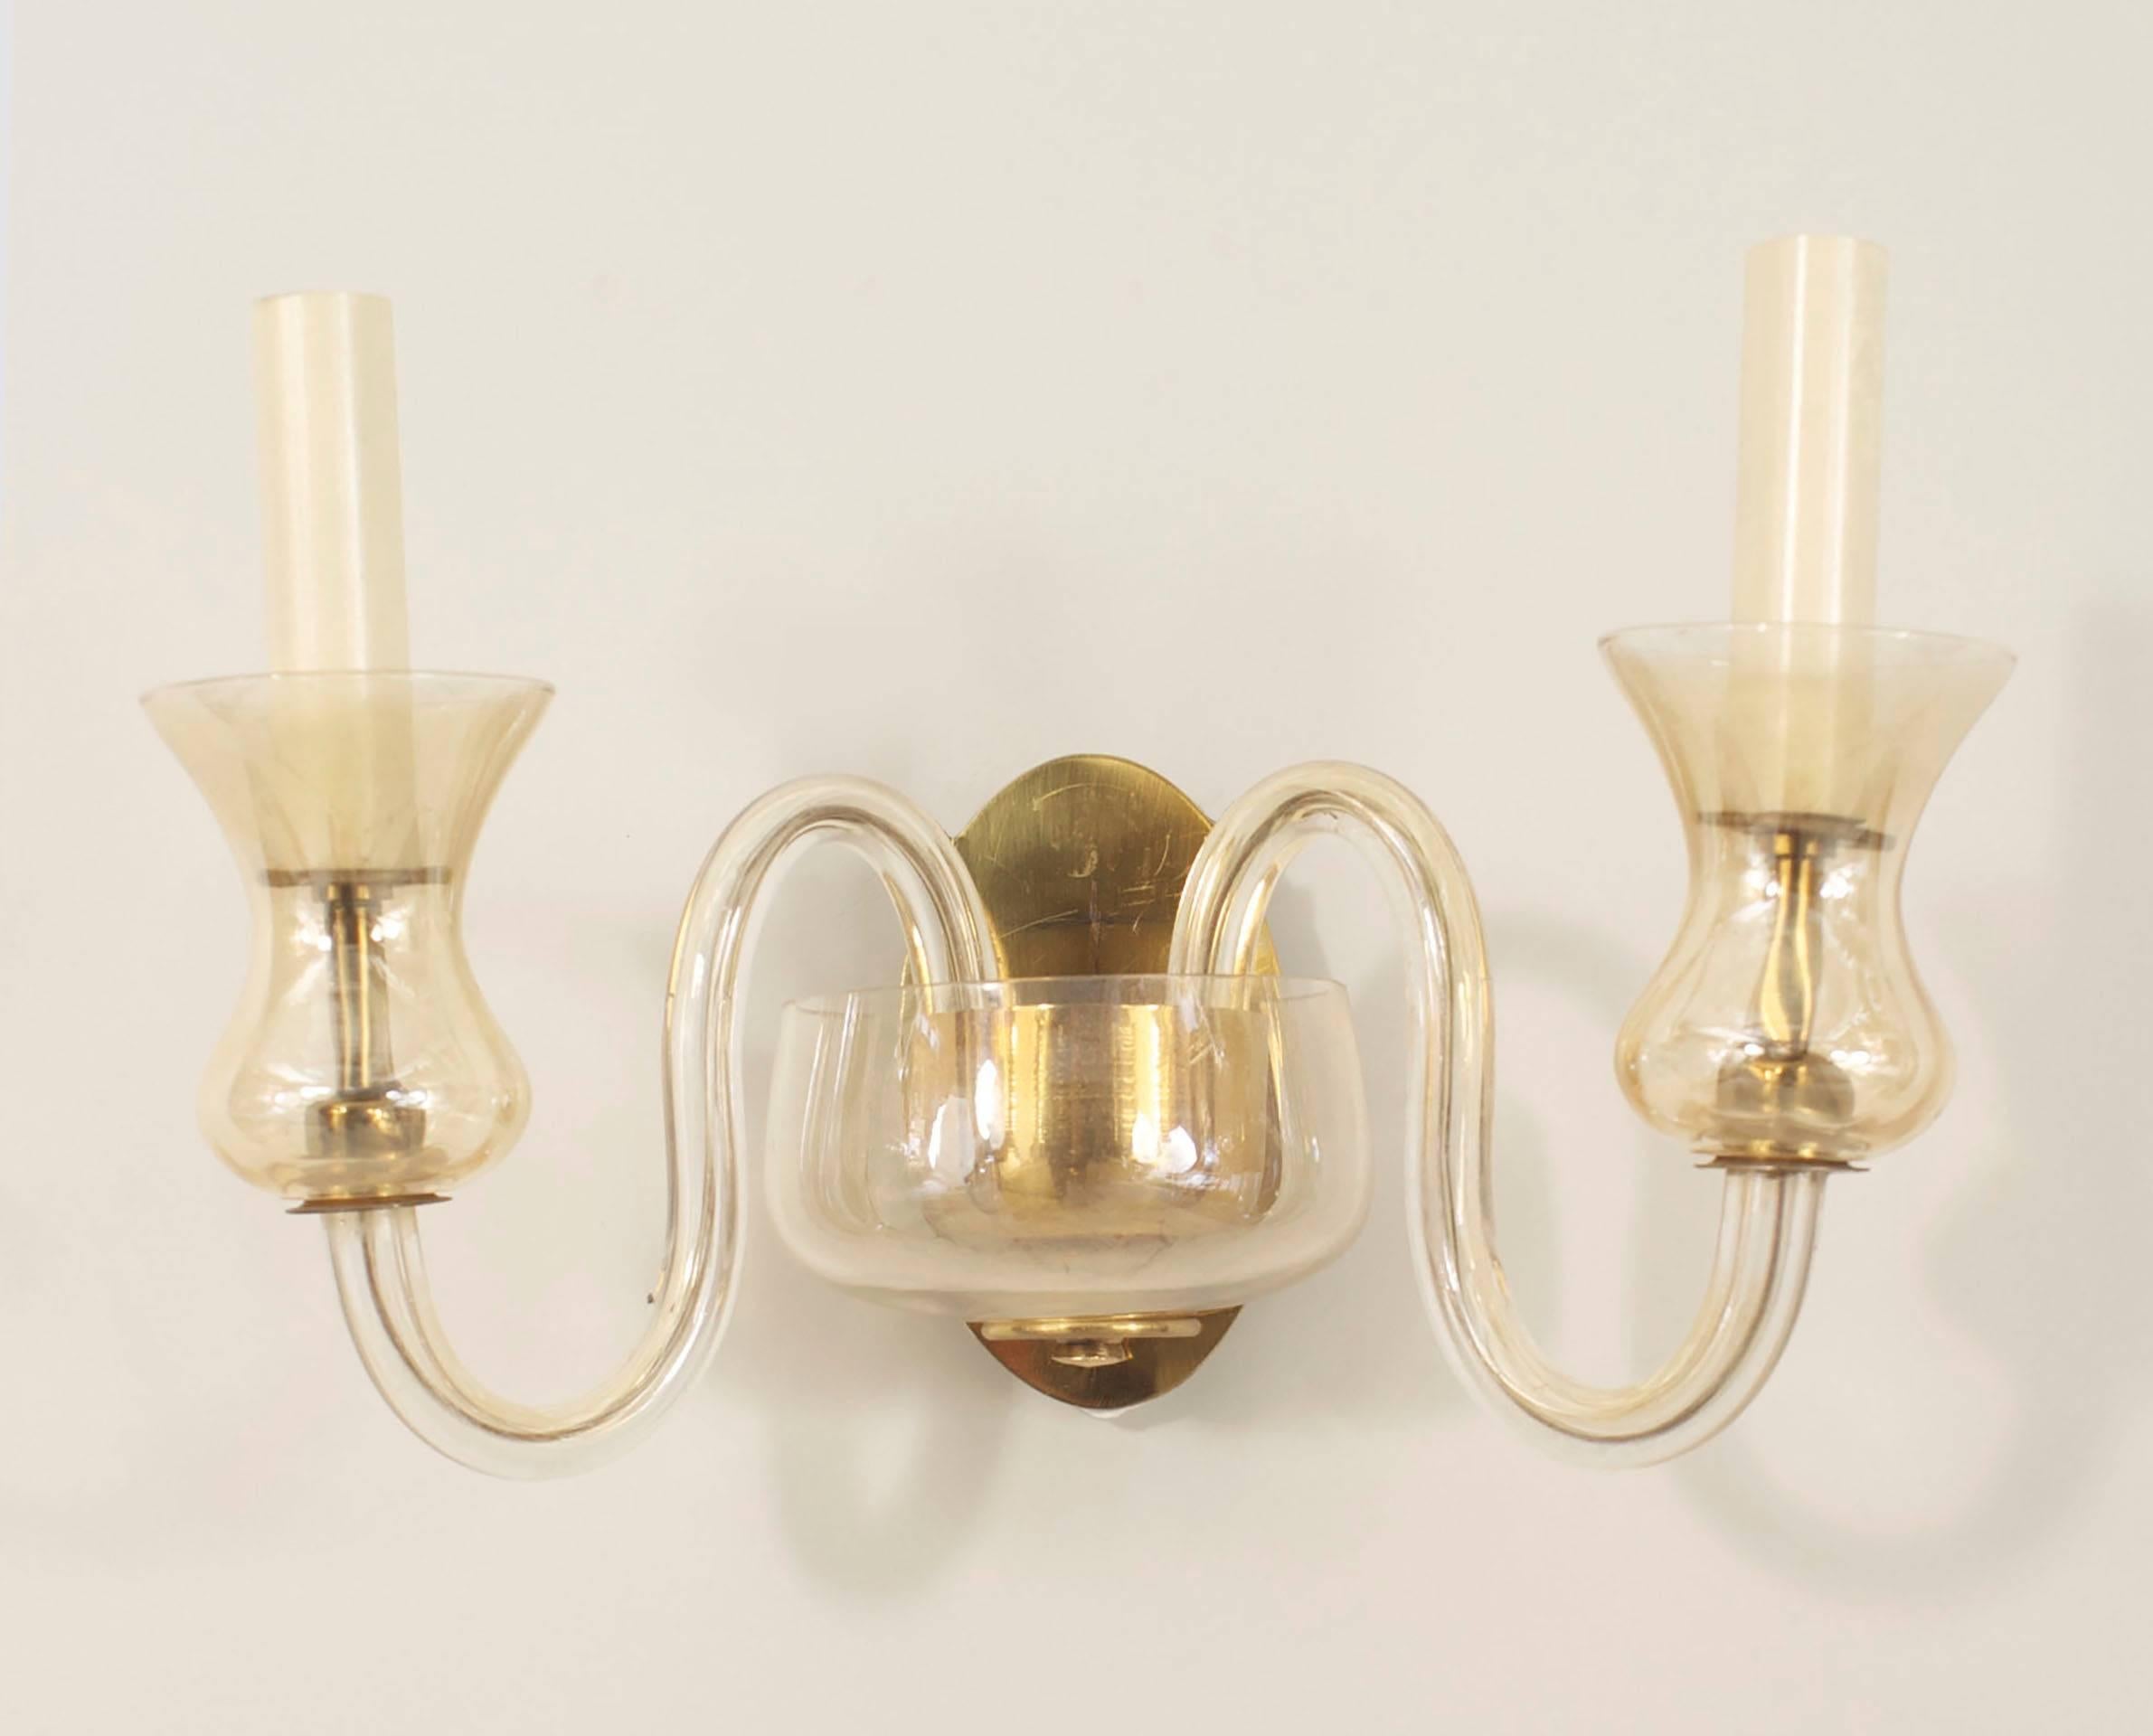 Pair of Italian Venetian (1940s) pink Murano glass wall sconces with two scroll-shaped movable arms supported by a brass backplate holding a shaped shade. (PRICED AS Pair)
